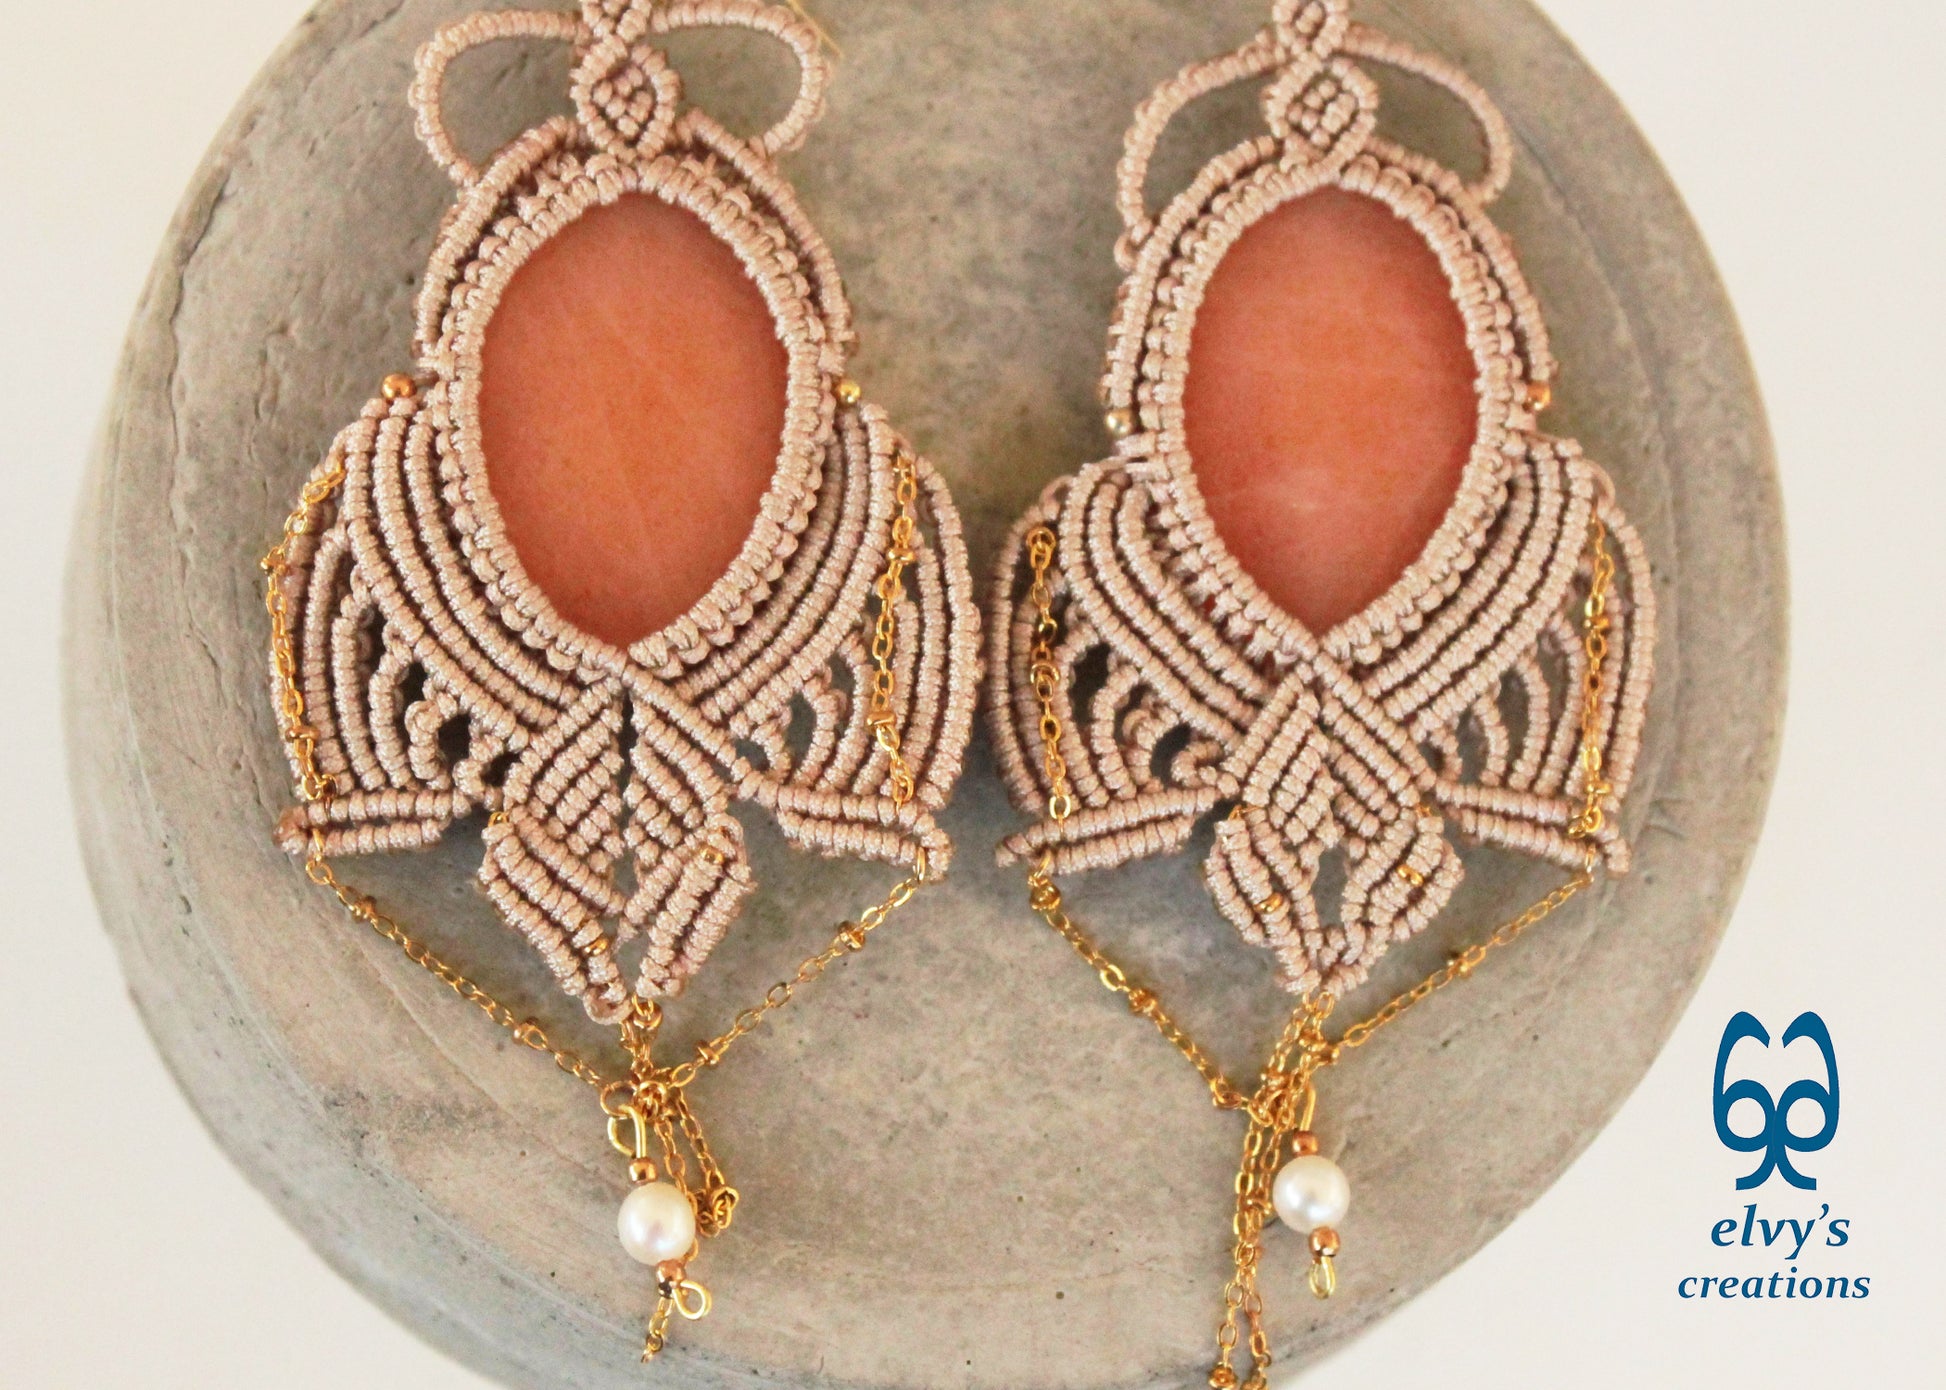 Beige Macrame Earrings with Rose Quartz and Pearls Lace Silver Earrings